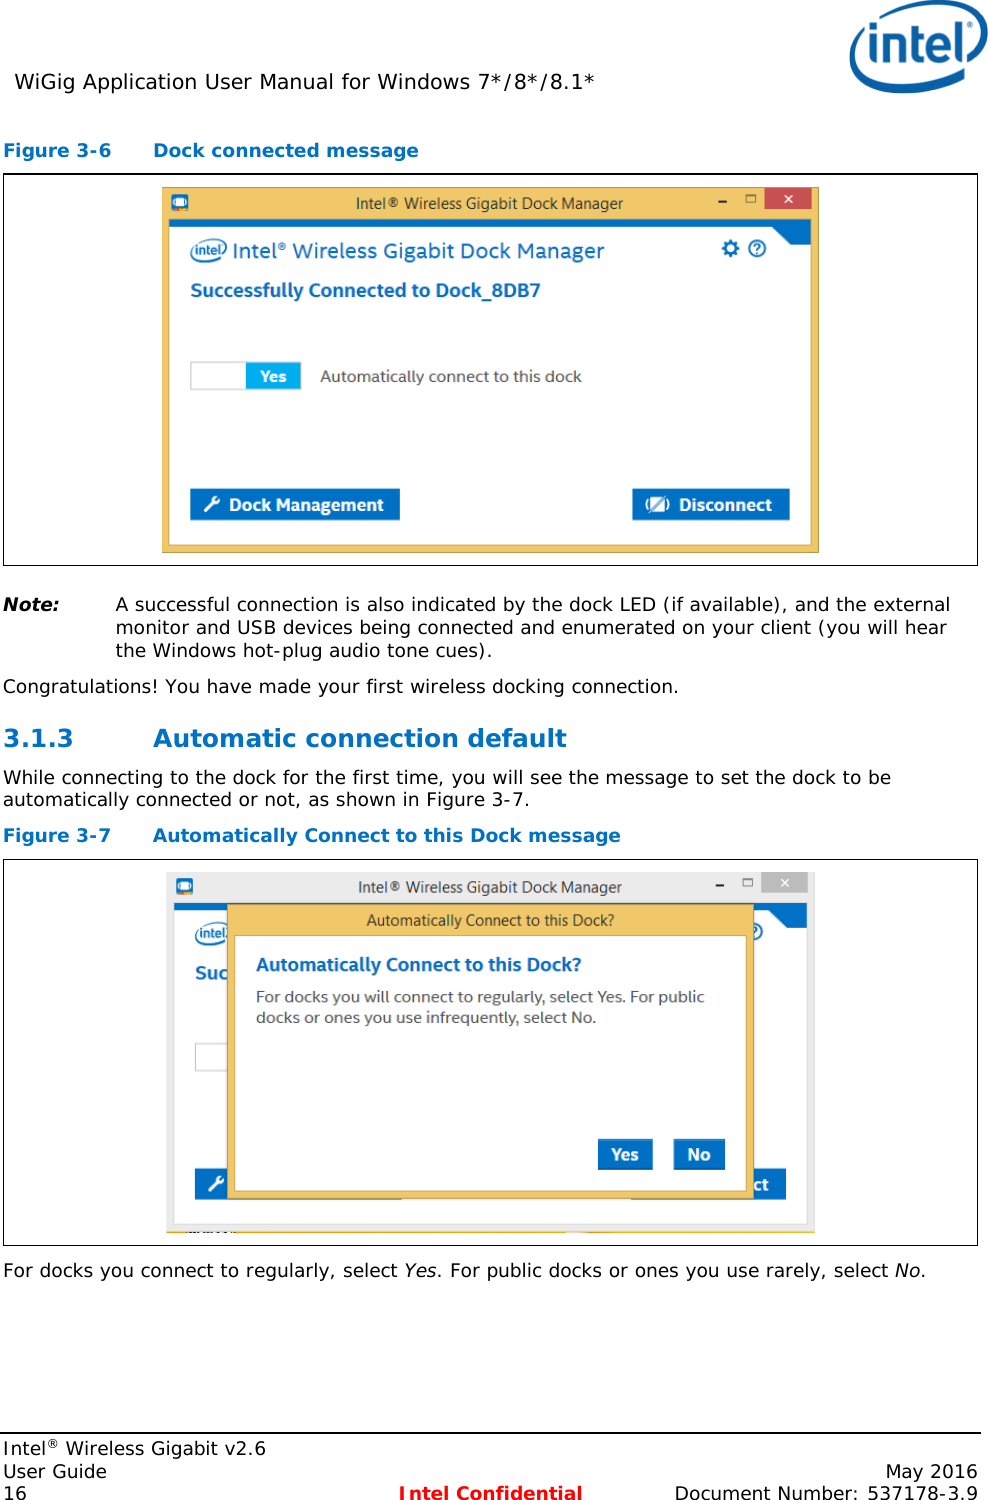 WiGig Application User Manual for Windows 7*/8*/8.1*    Intel® Wireless Gigabit v2.6 User Guide    May 2016 16 Intel Confidential Document Number: 537178-3.9 Figure 3-6  Dock connected message  Note: A successful connection is also indicated by the dock LED (if available), and the external monitor and USB devices being connected and enumerated on your client (you will hear the Windows hot-plug audio tone cues).  Congratulations! You have made your first wireless docking connection. 3.1.3 Automatic connection default While connecting to the dock for the first time, you will see the message to set the dock to be automatically connected or not, as shown in Figure 3-7. Figure 3-7  Automatically Connect to this Dock message  For docks you connect to regularly, select Yes. For public docks or ones you use rarely, select No.  